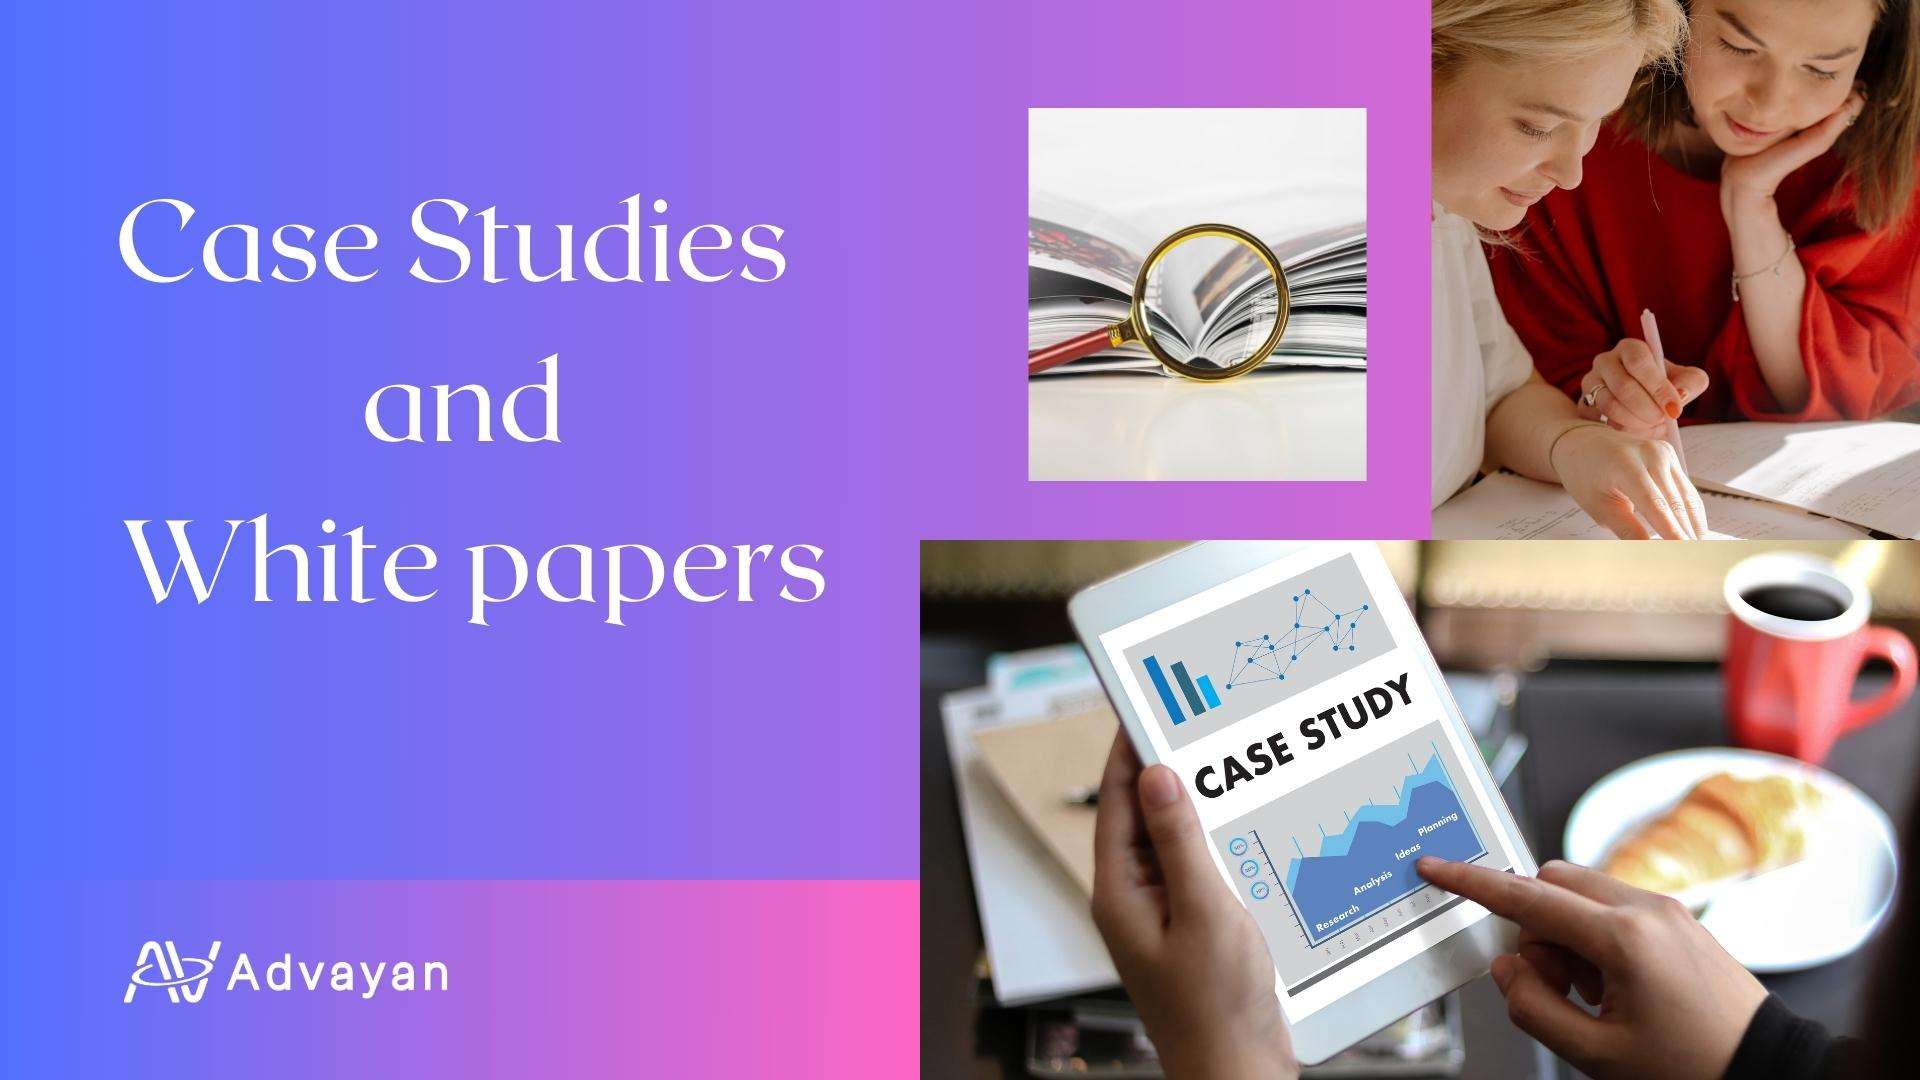 Case Studies and White papers